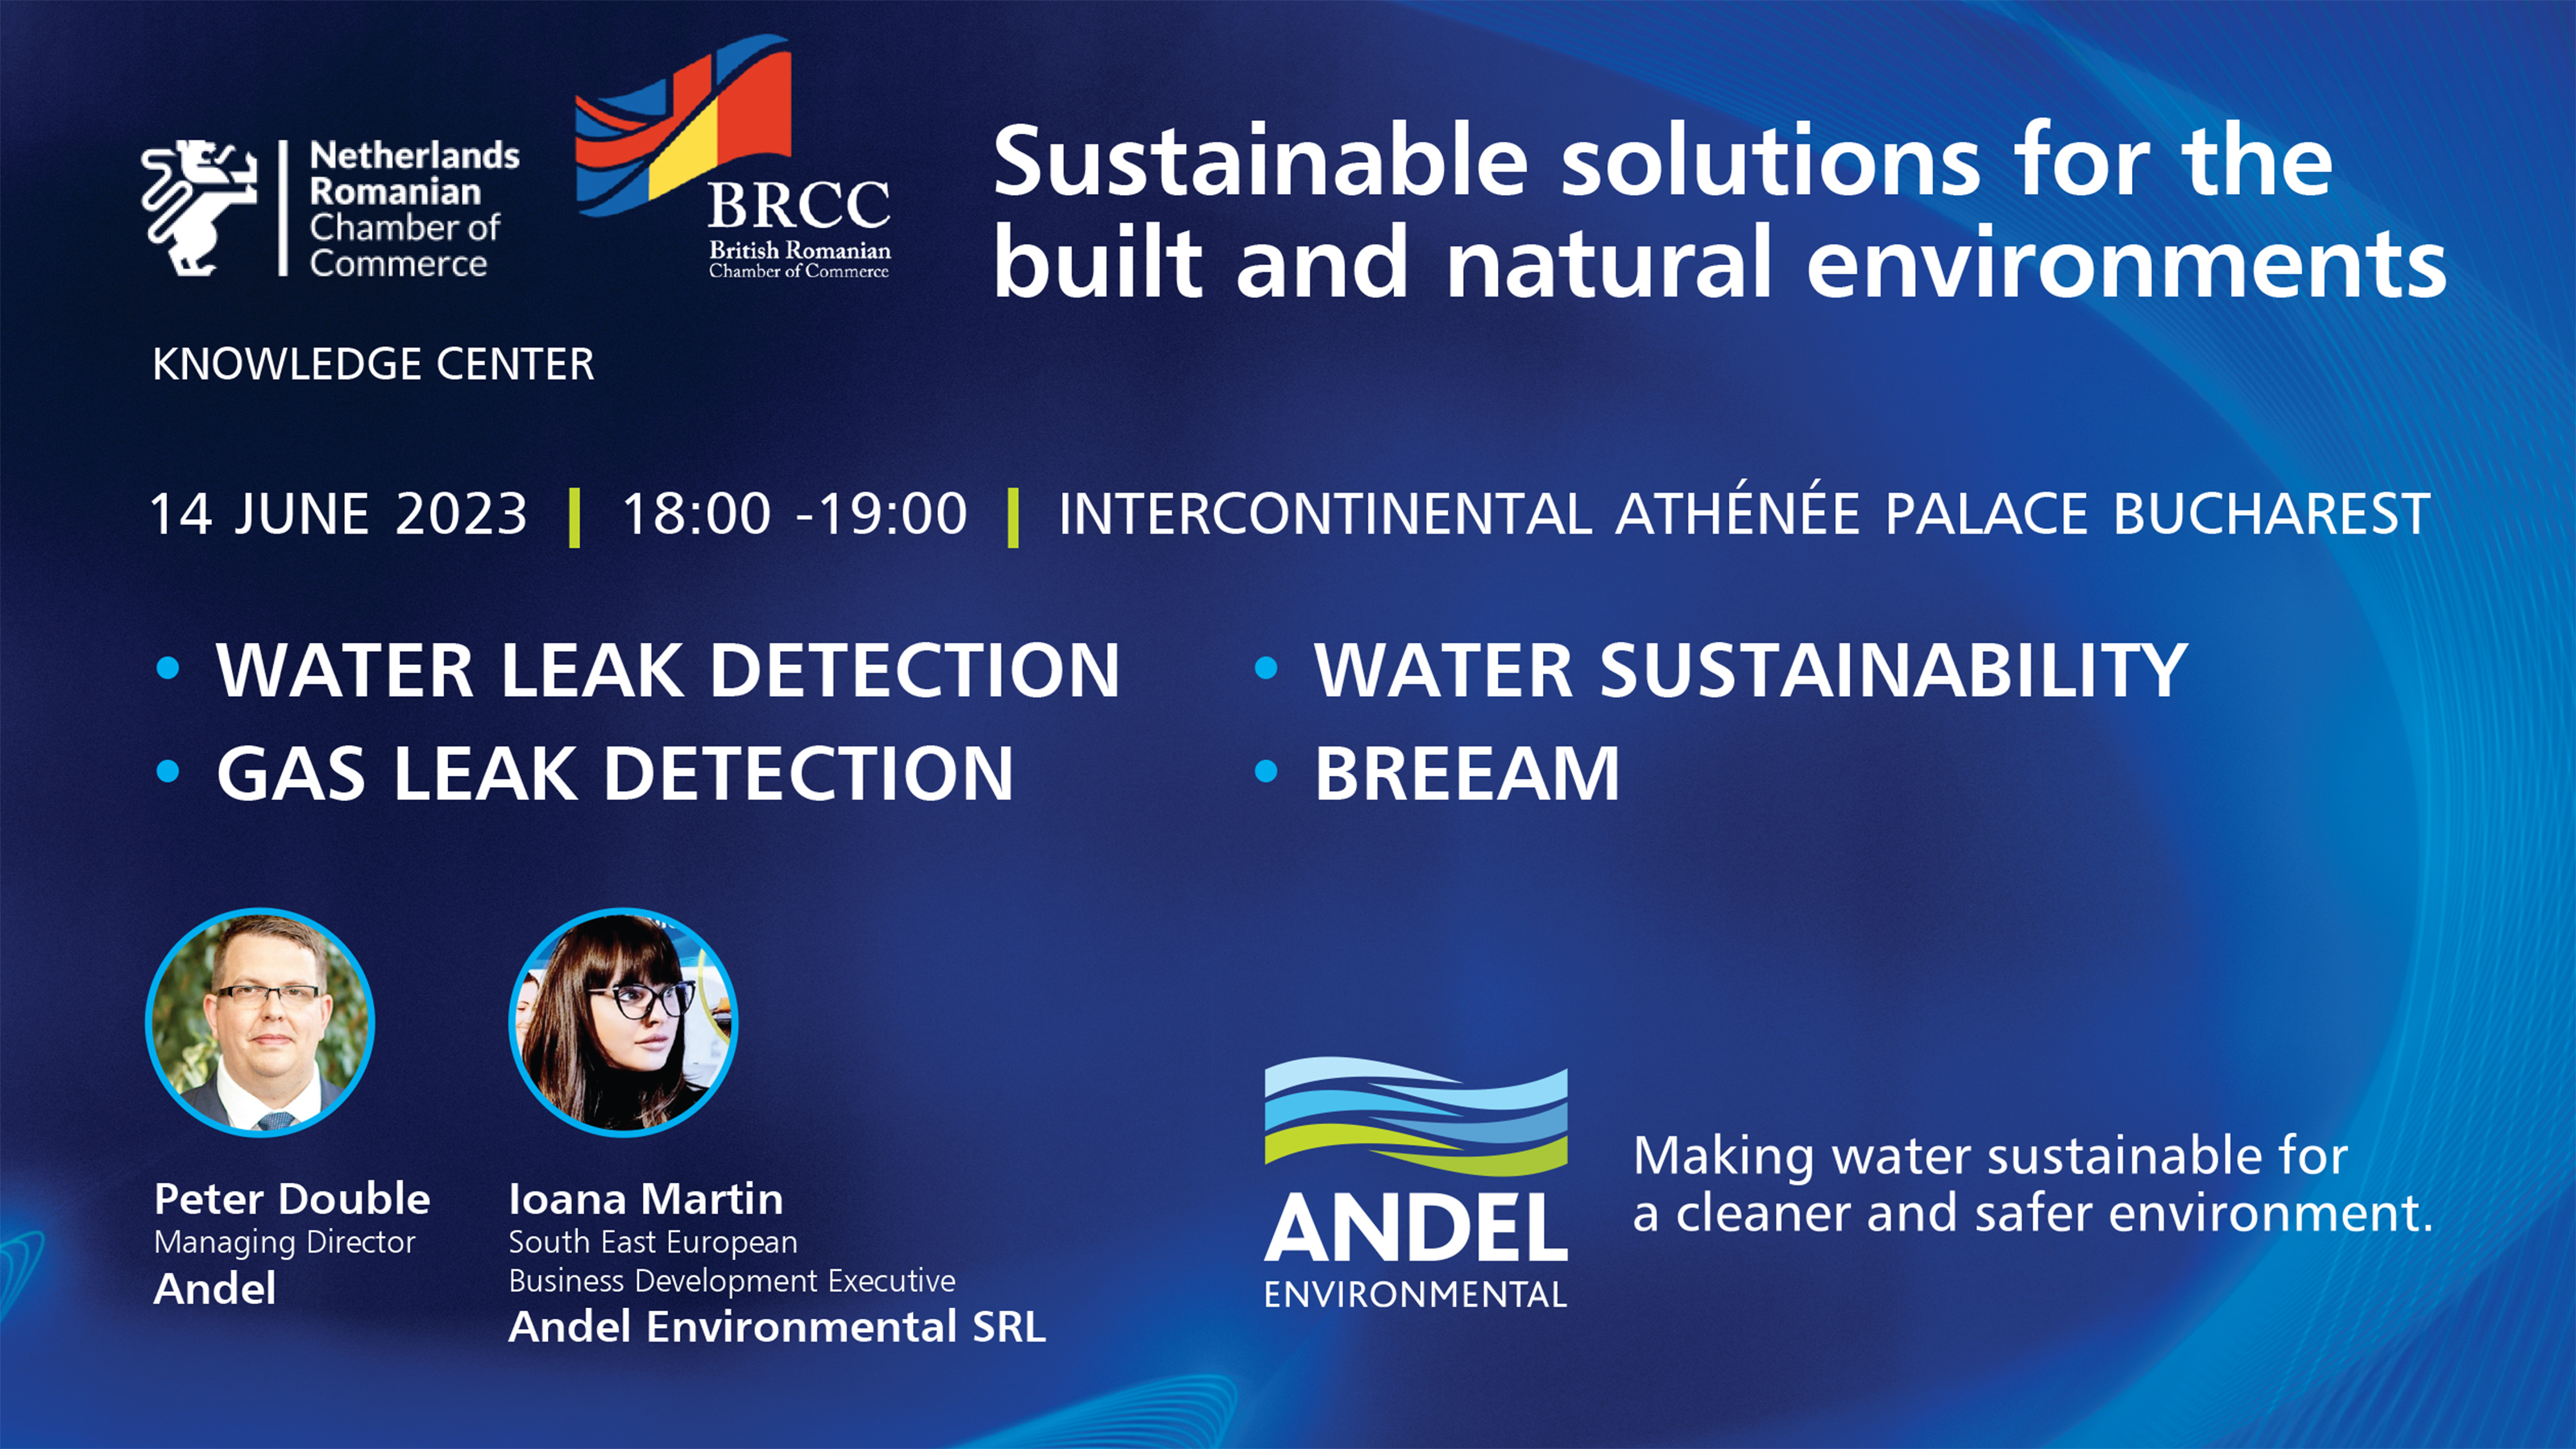 NRCC Sustainable Solutions for Build and Natural Environments